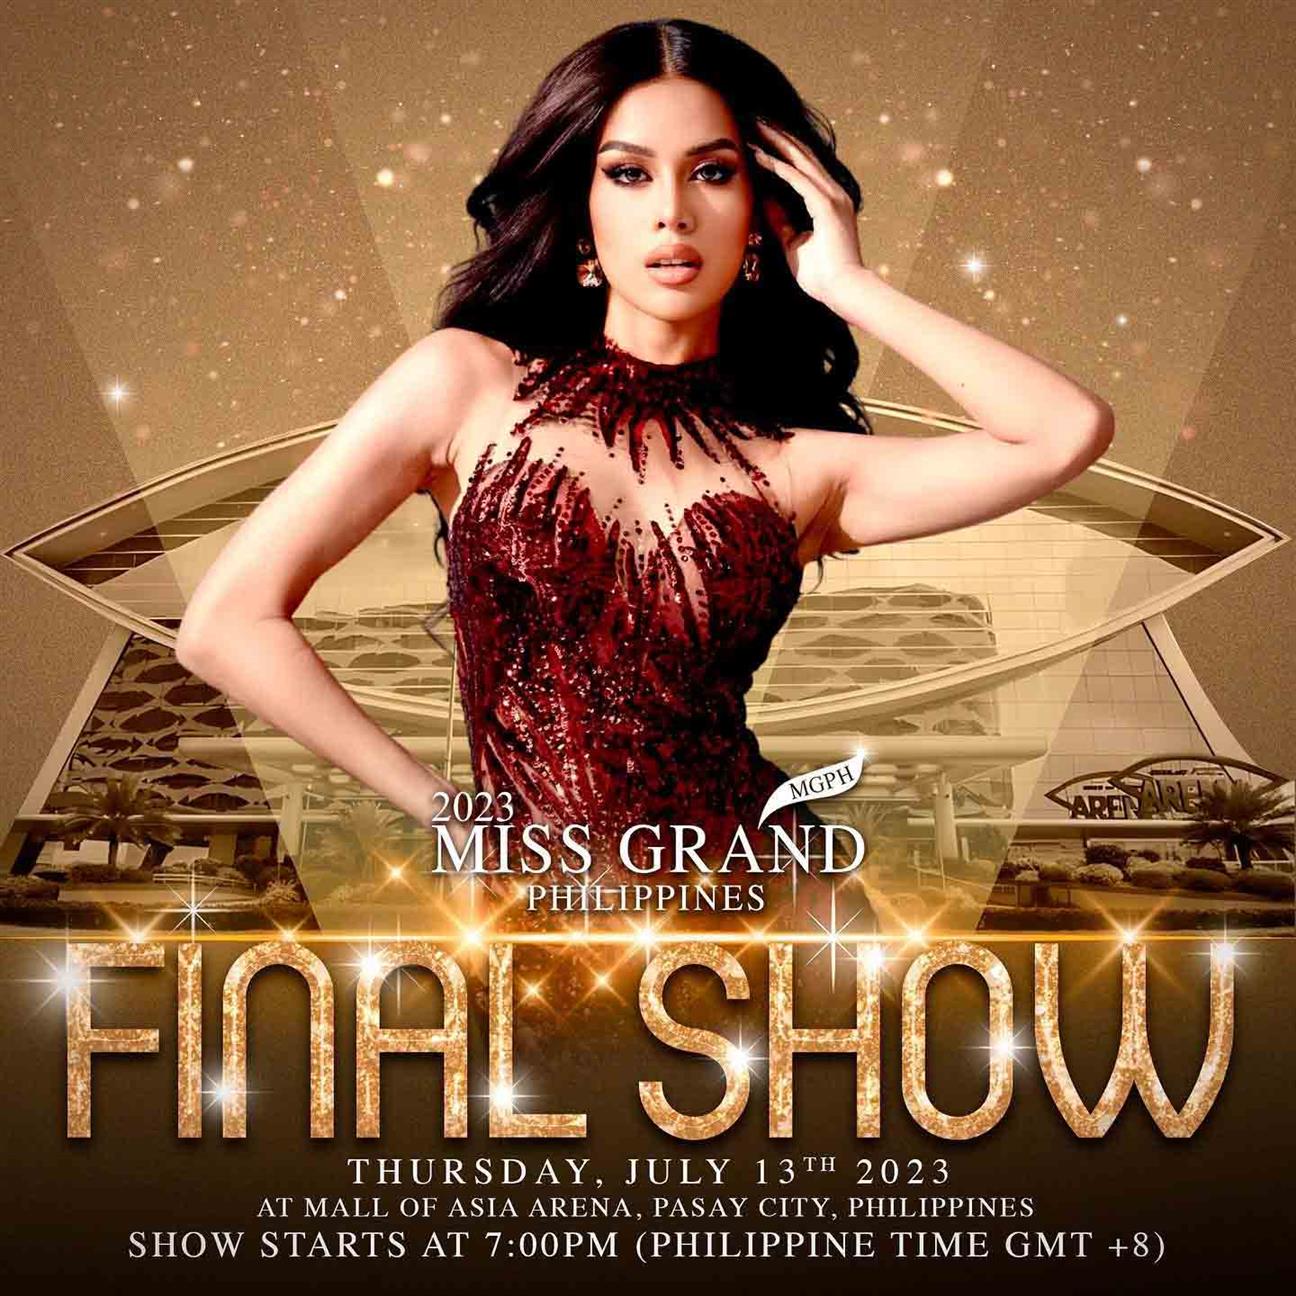 Miss Grand Philippines 2023 finale details announced